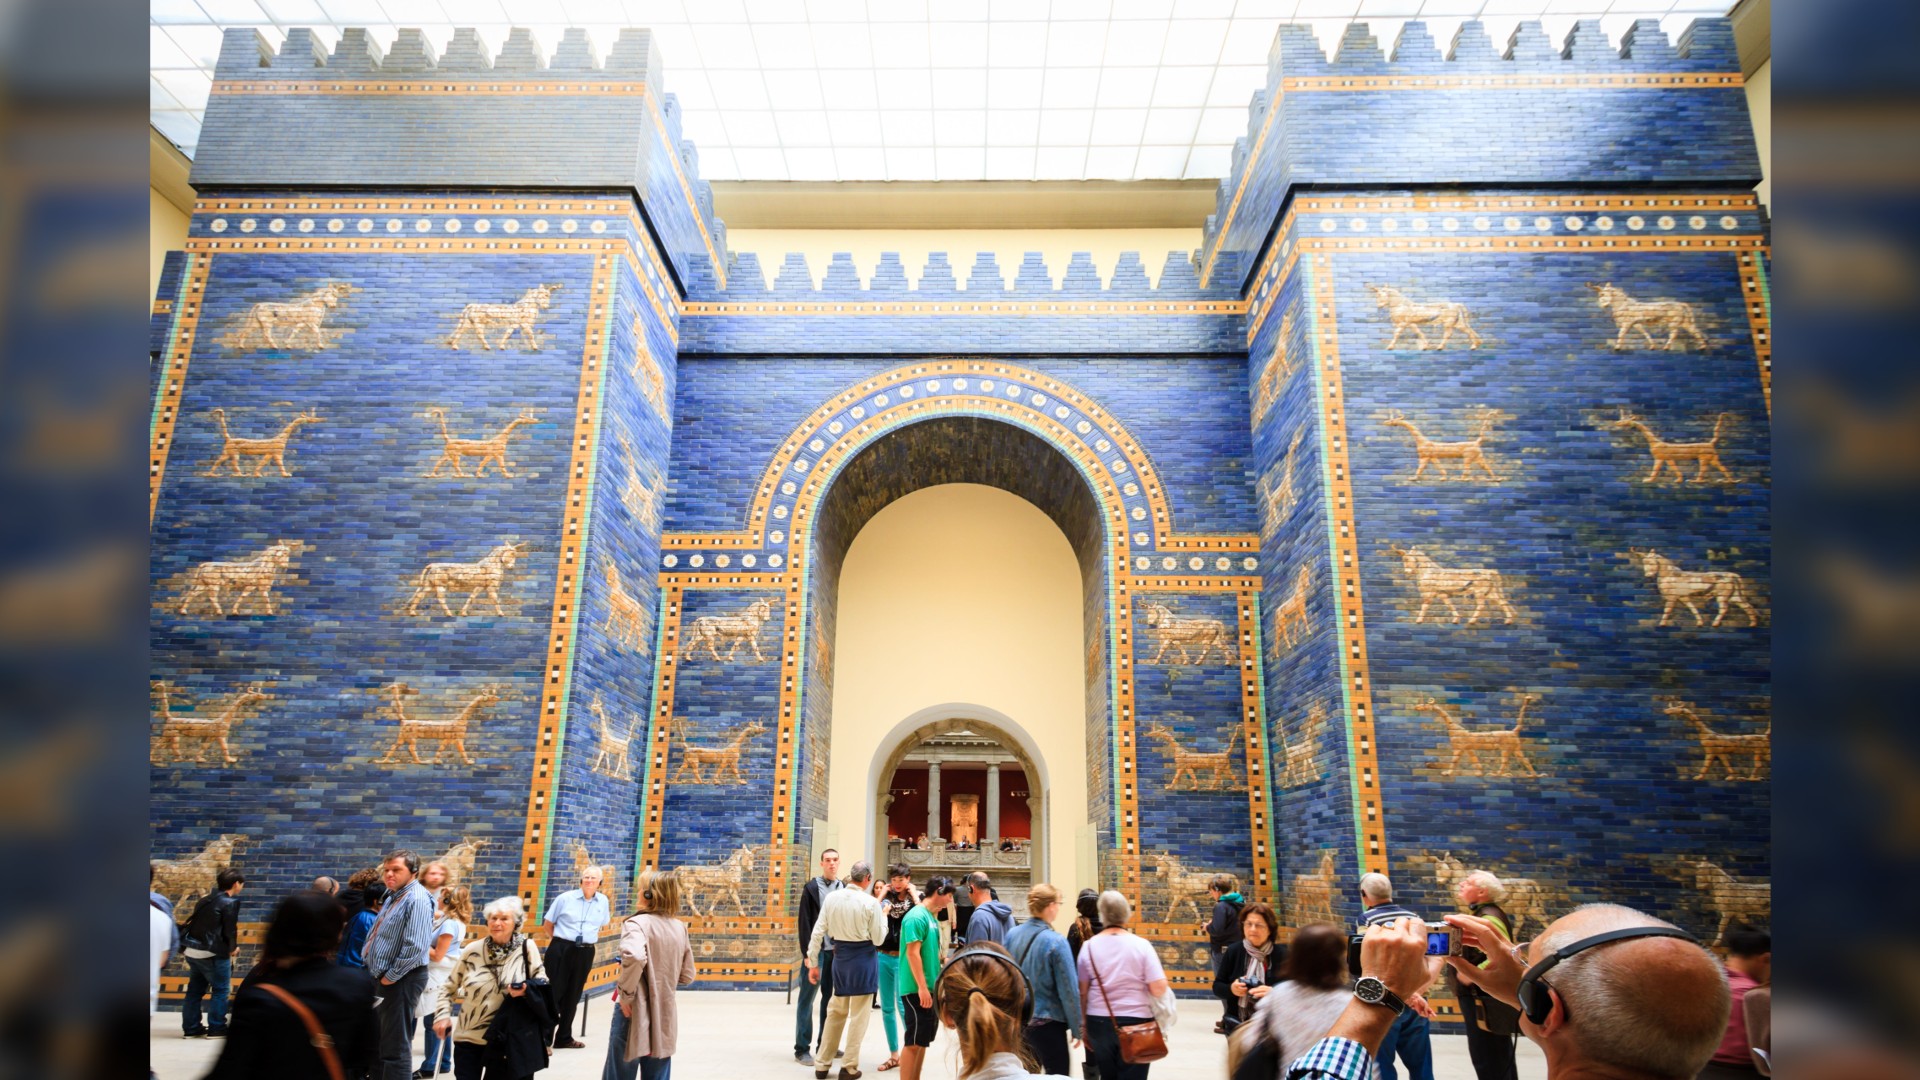 Reconstructed Ishtar Gate from Babylon in the Pergamom Museum, Berlin, Germany. It is a very tall structure made out of blue bricks and has golden horses on it.